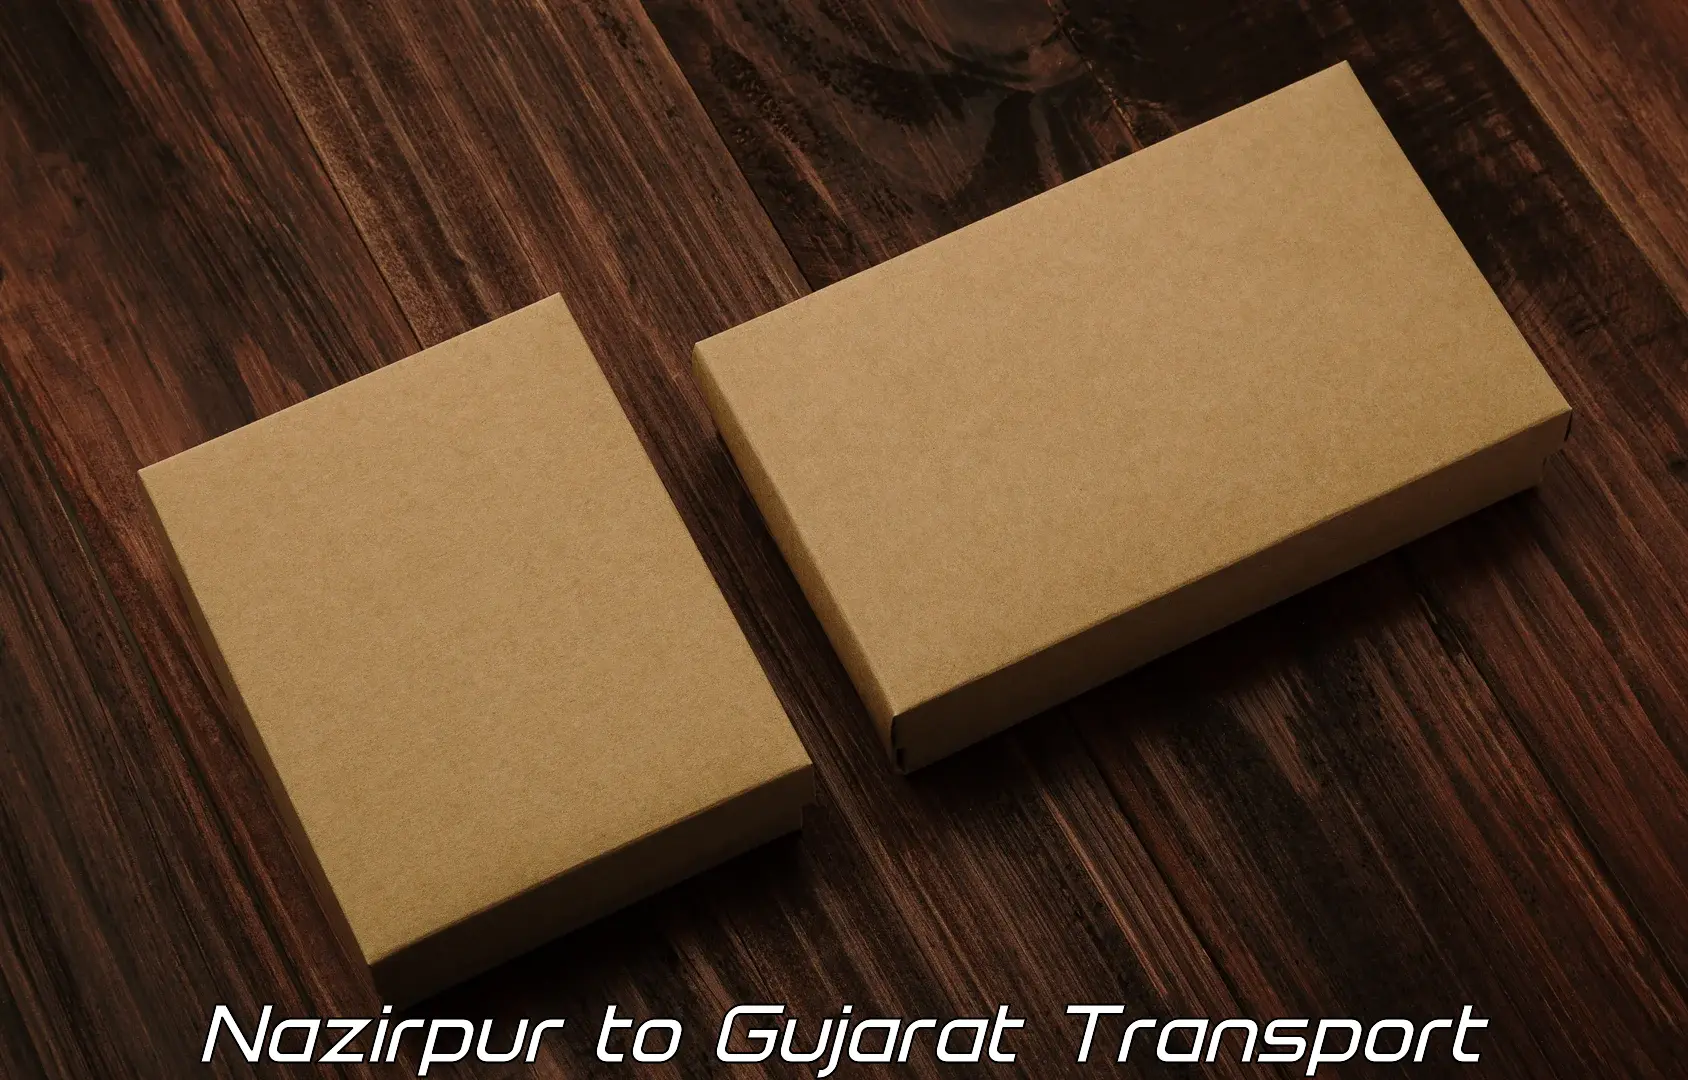 Furniture transport service Nazirpur to Ahmedabad